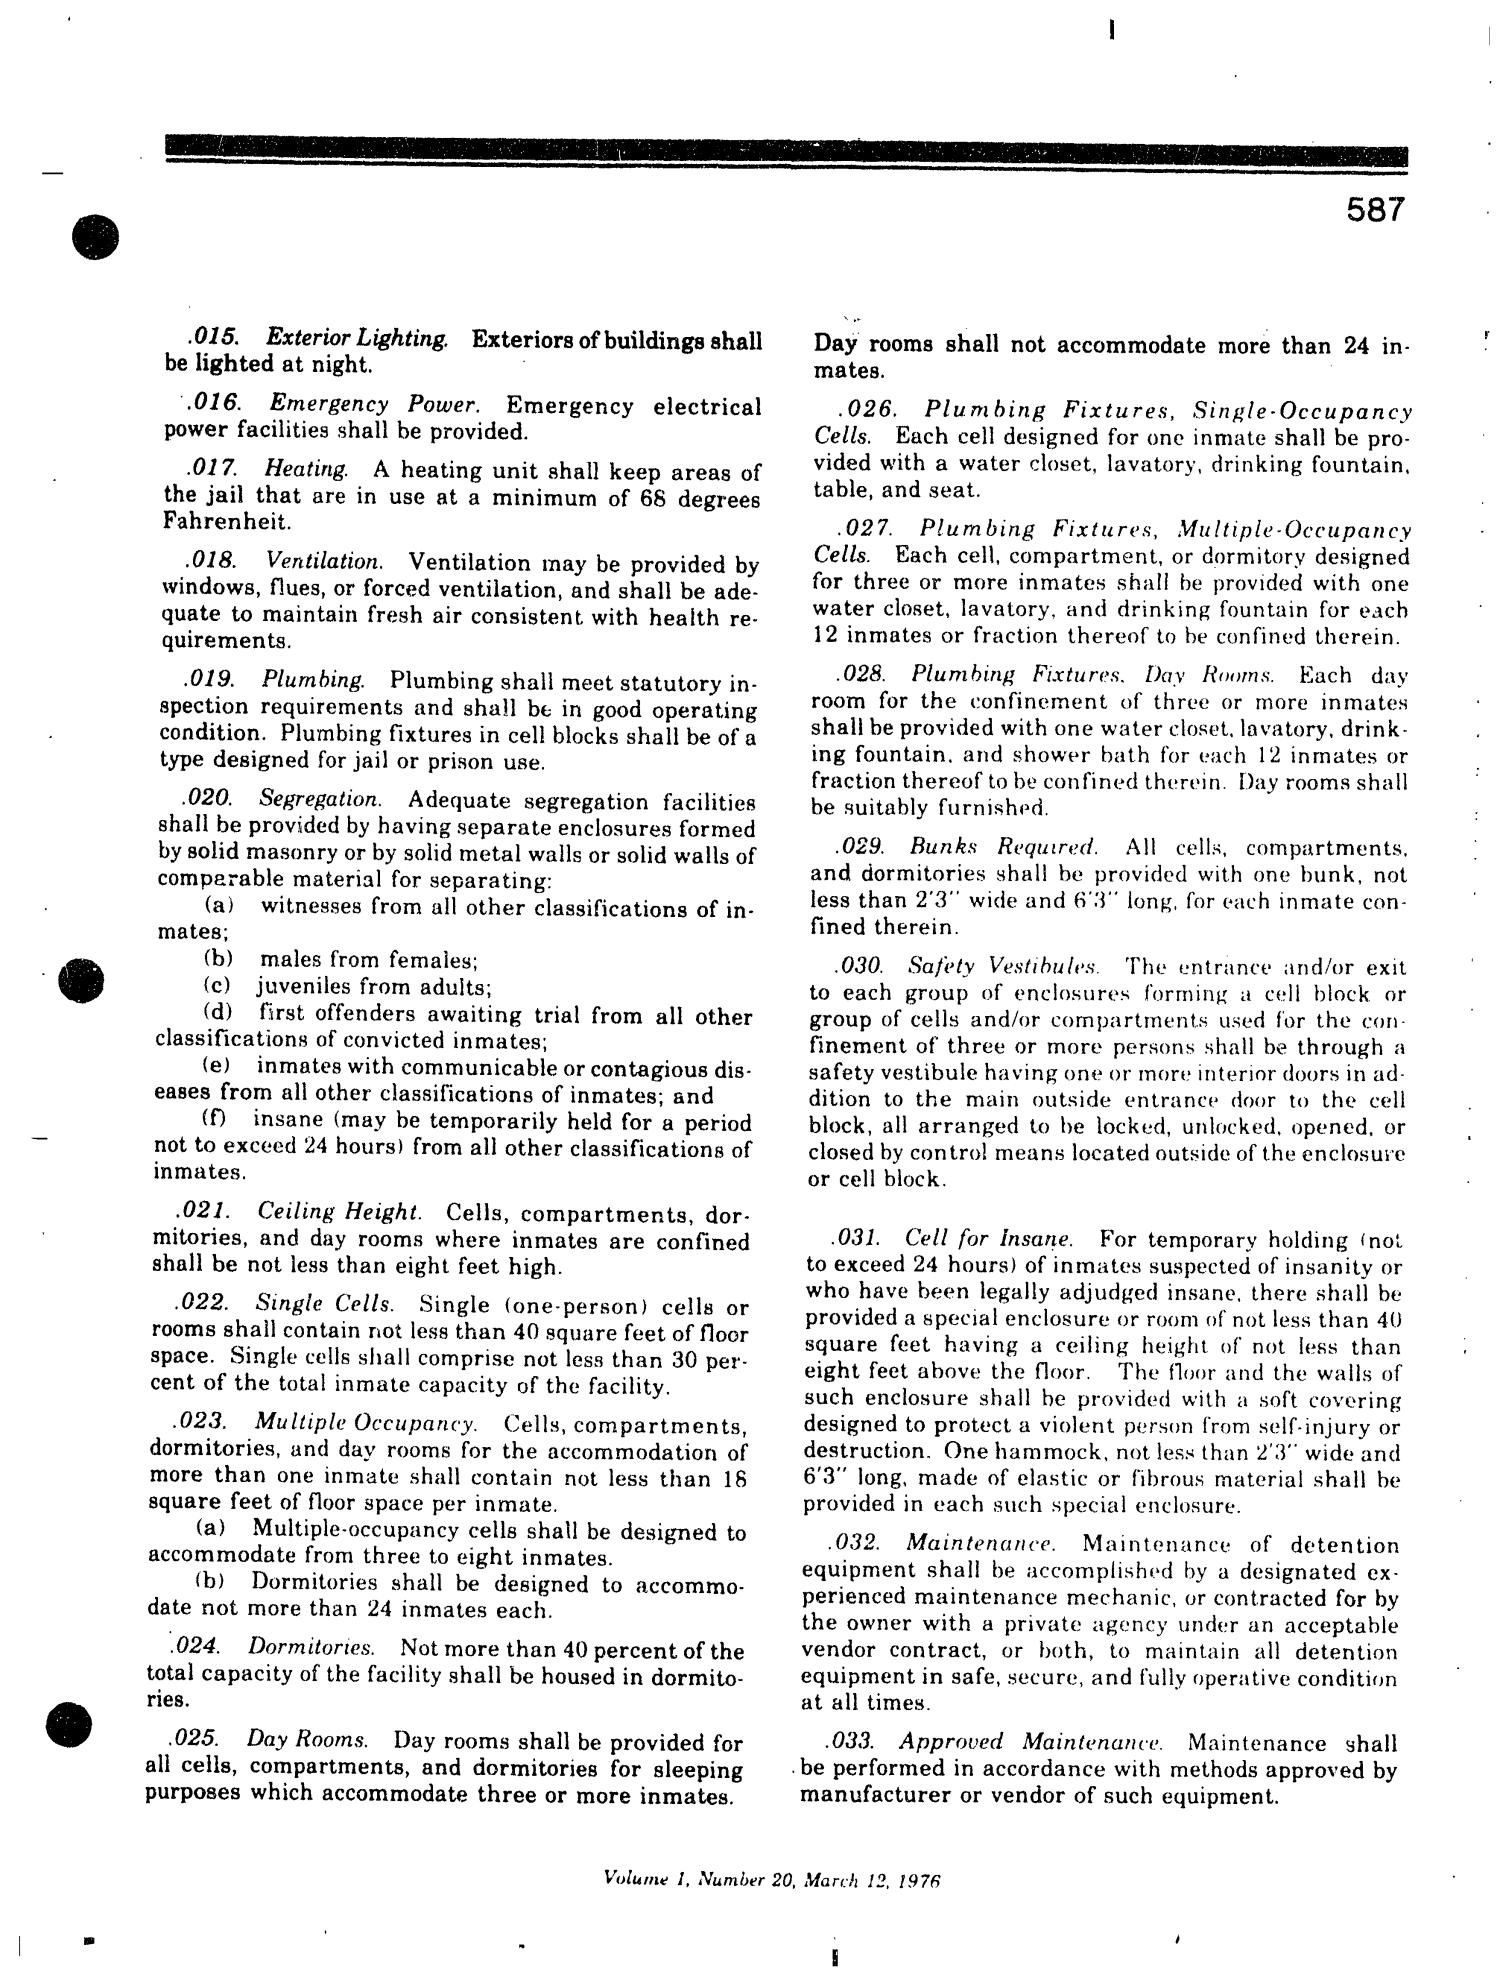 Texas Register, Volume 1, Number 20, Pages 565-598, March 12, 1976
                                                
                                                    587
                                                